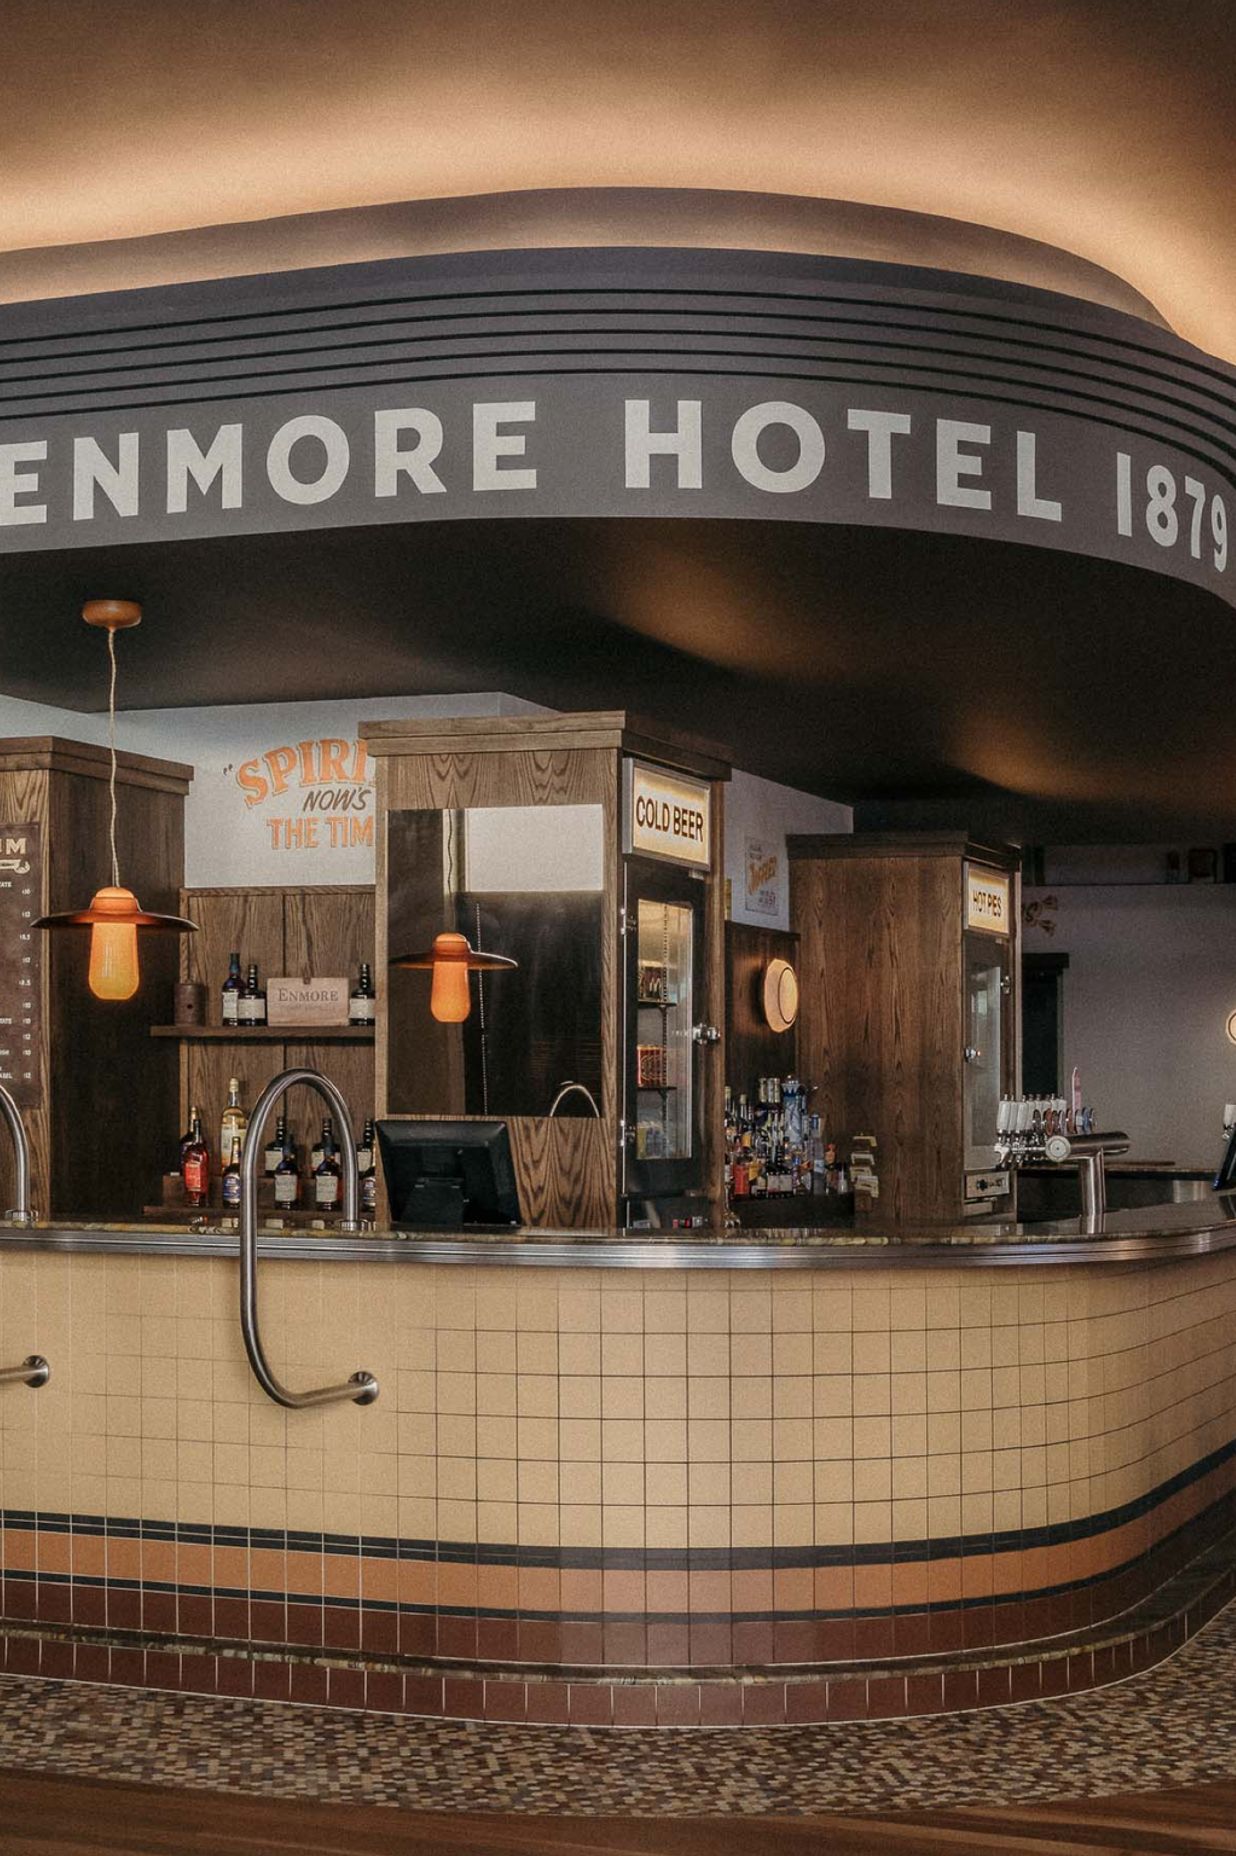 The Enmore Hotel